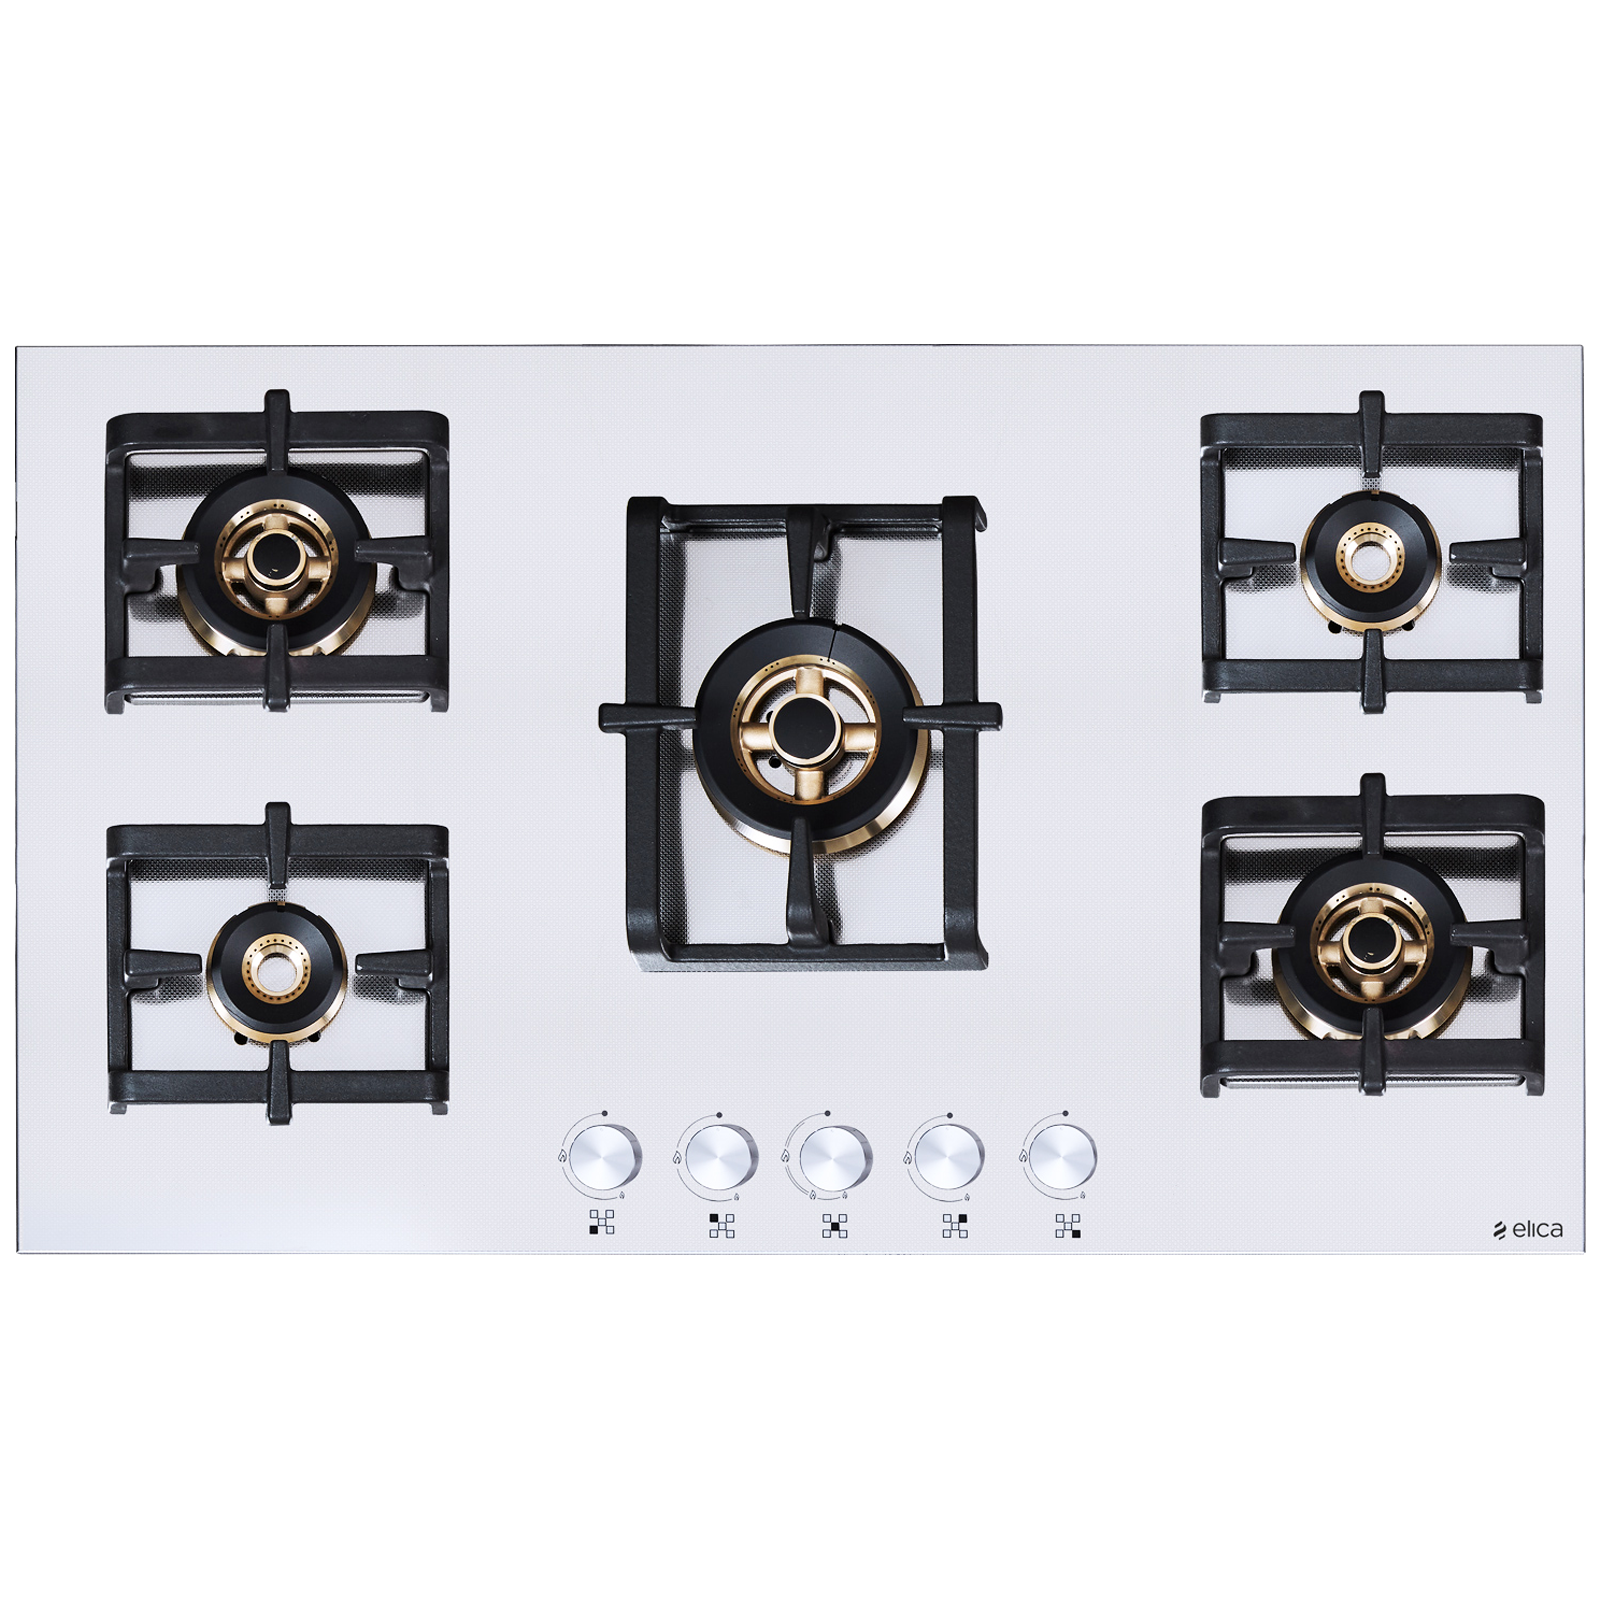 Elica Inox Pro FB MFC 5B 90 MT 5 Burner Stainless Steel Built-in Gas Hob (Cast Iron Grids, 3025, Steel)_1